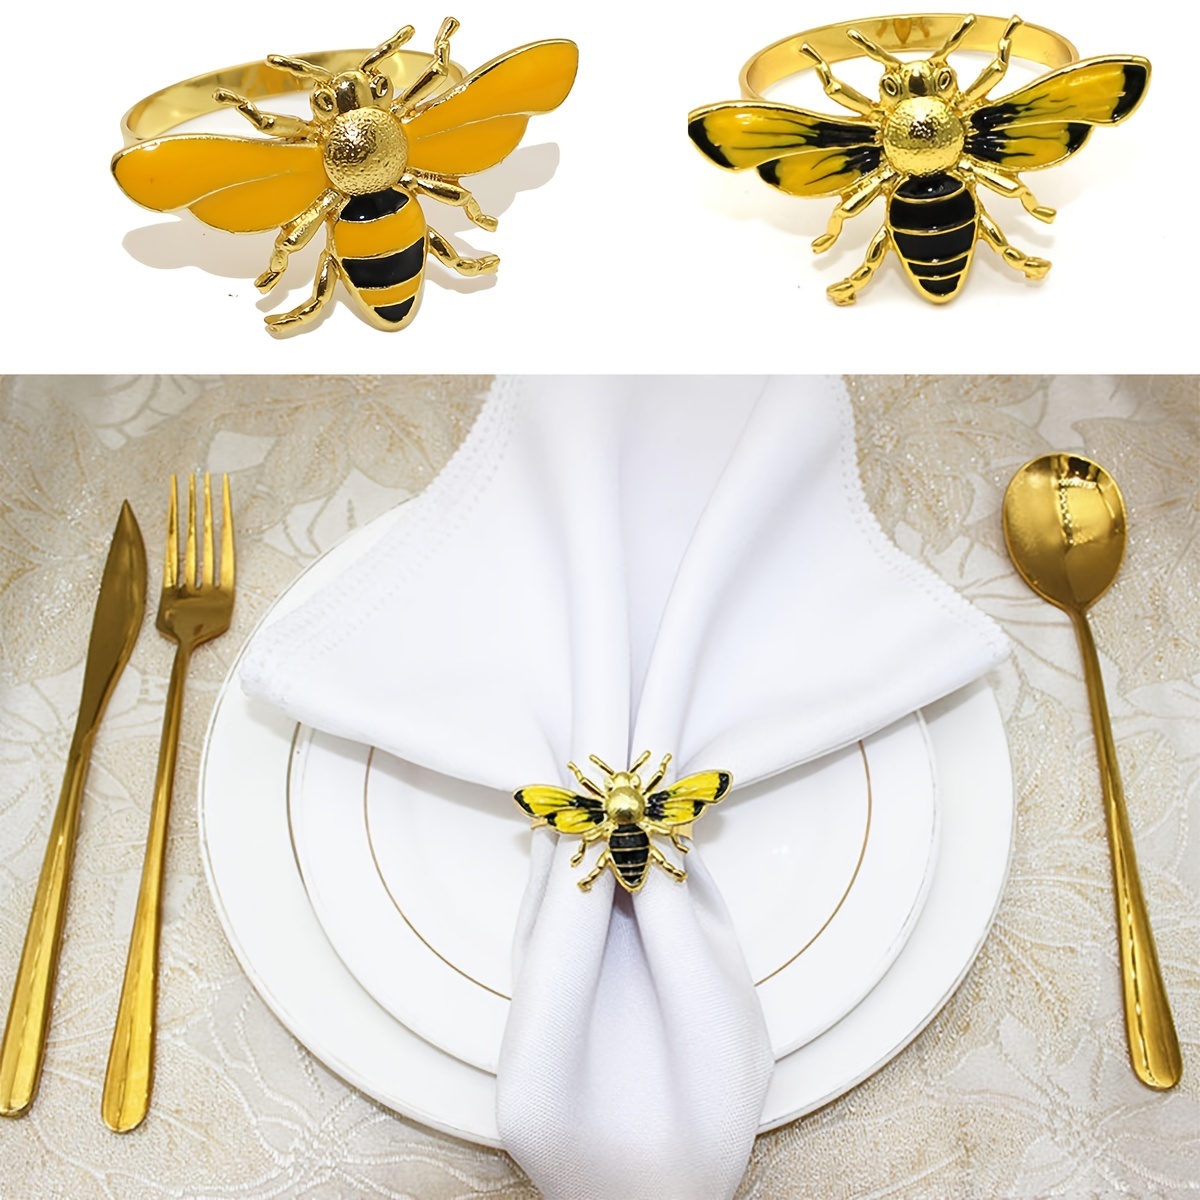 Bee Party Plates and Napkins - Happy Bee Day Party Supplies for